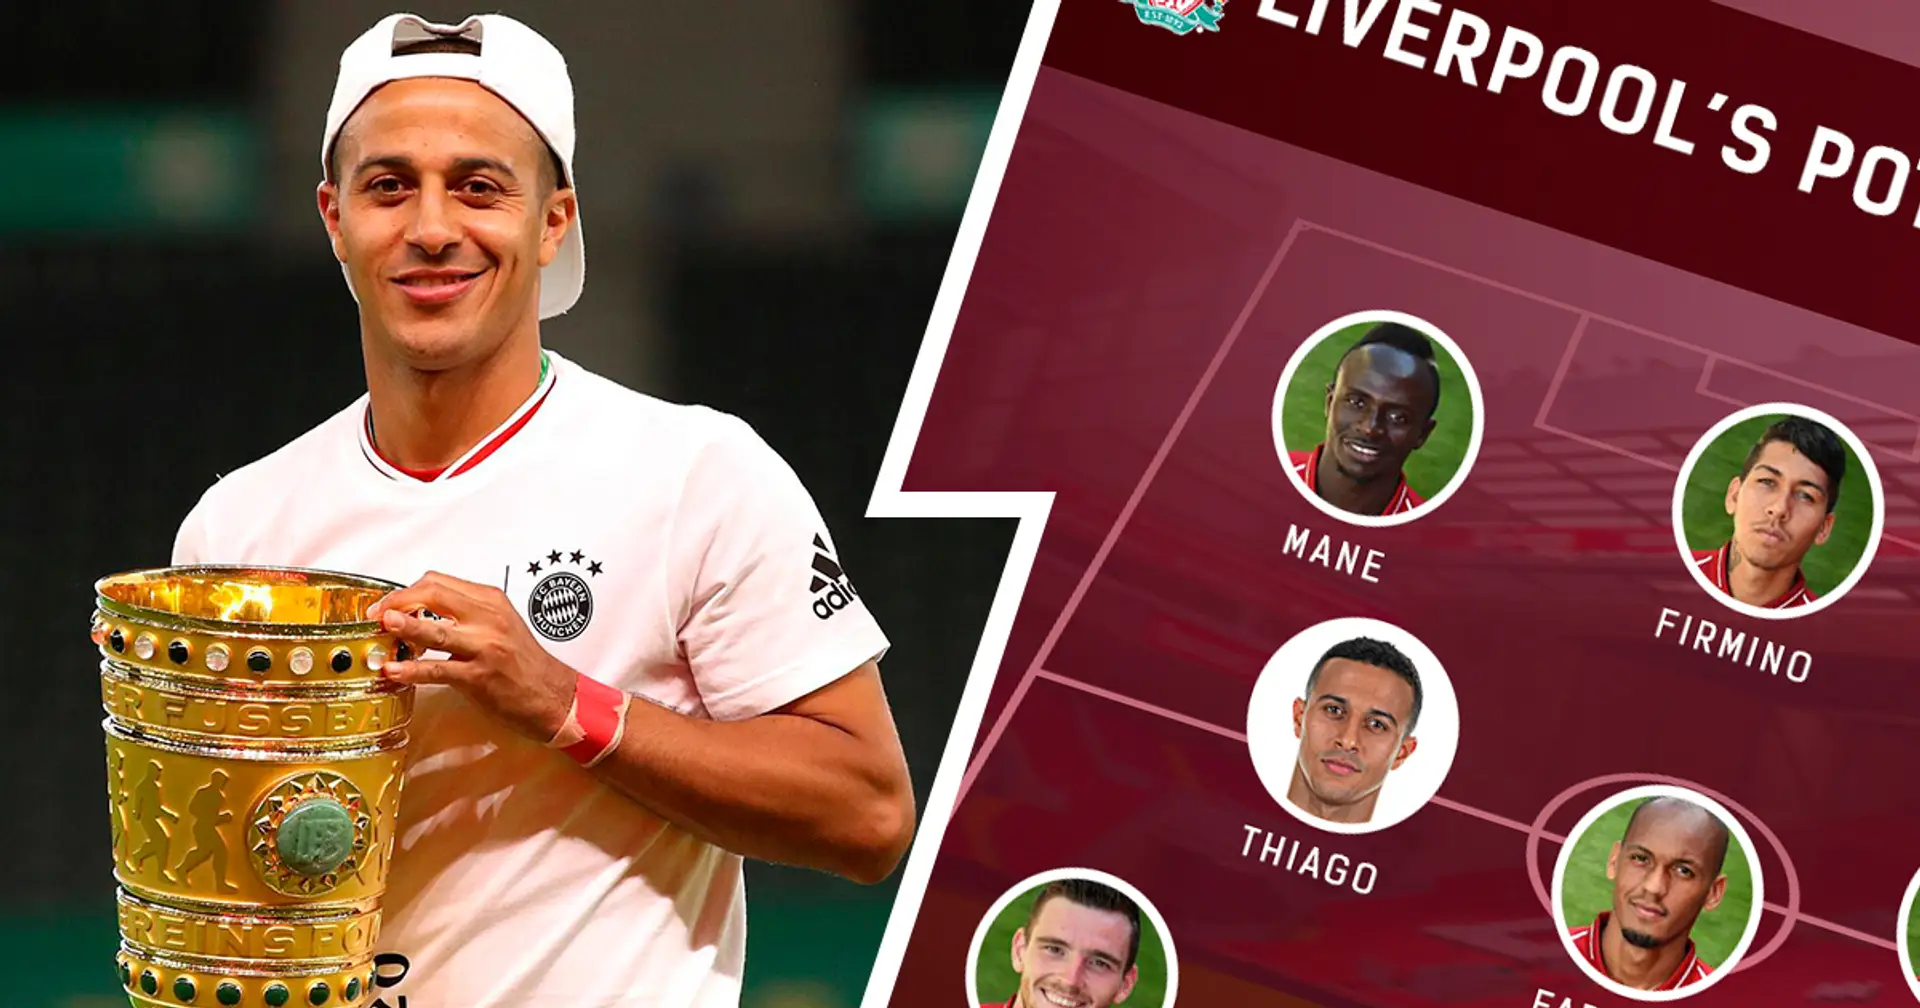 Liverpool's potential XI next season based on latest transfer round-up: Thiago in